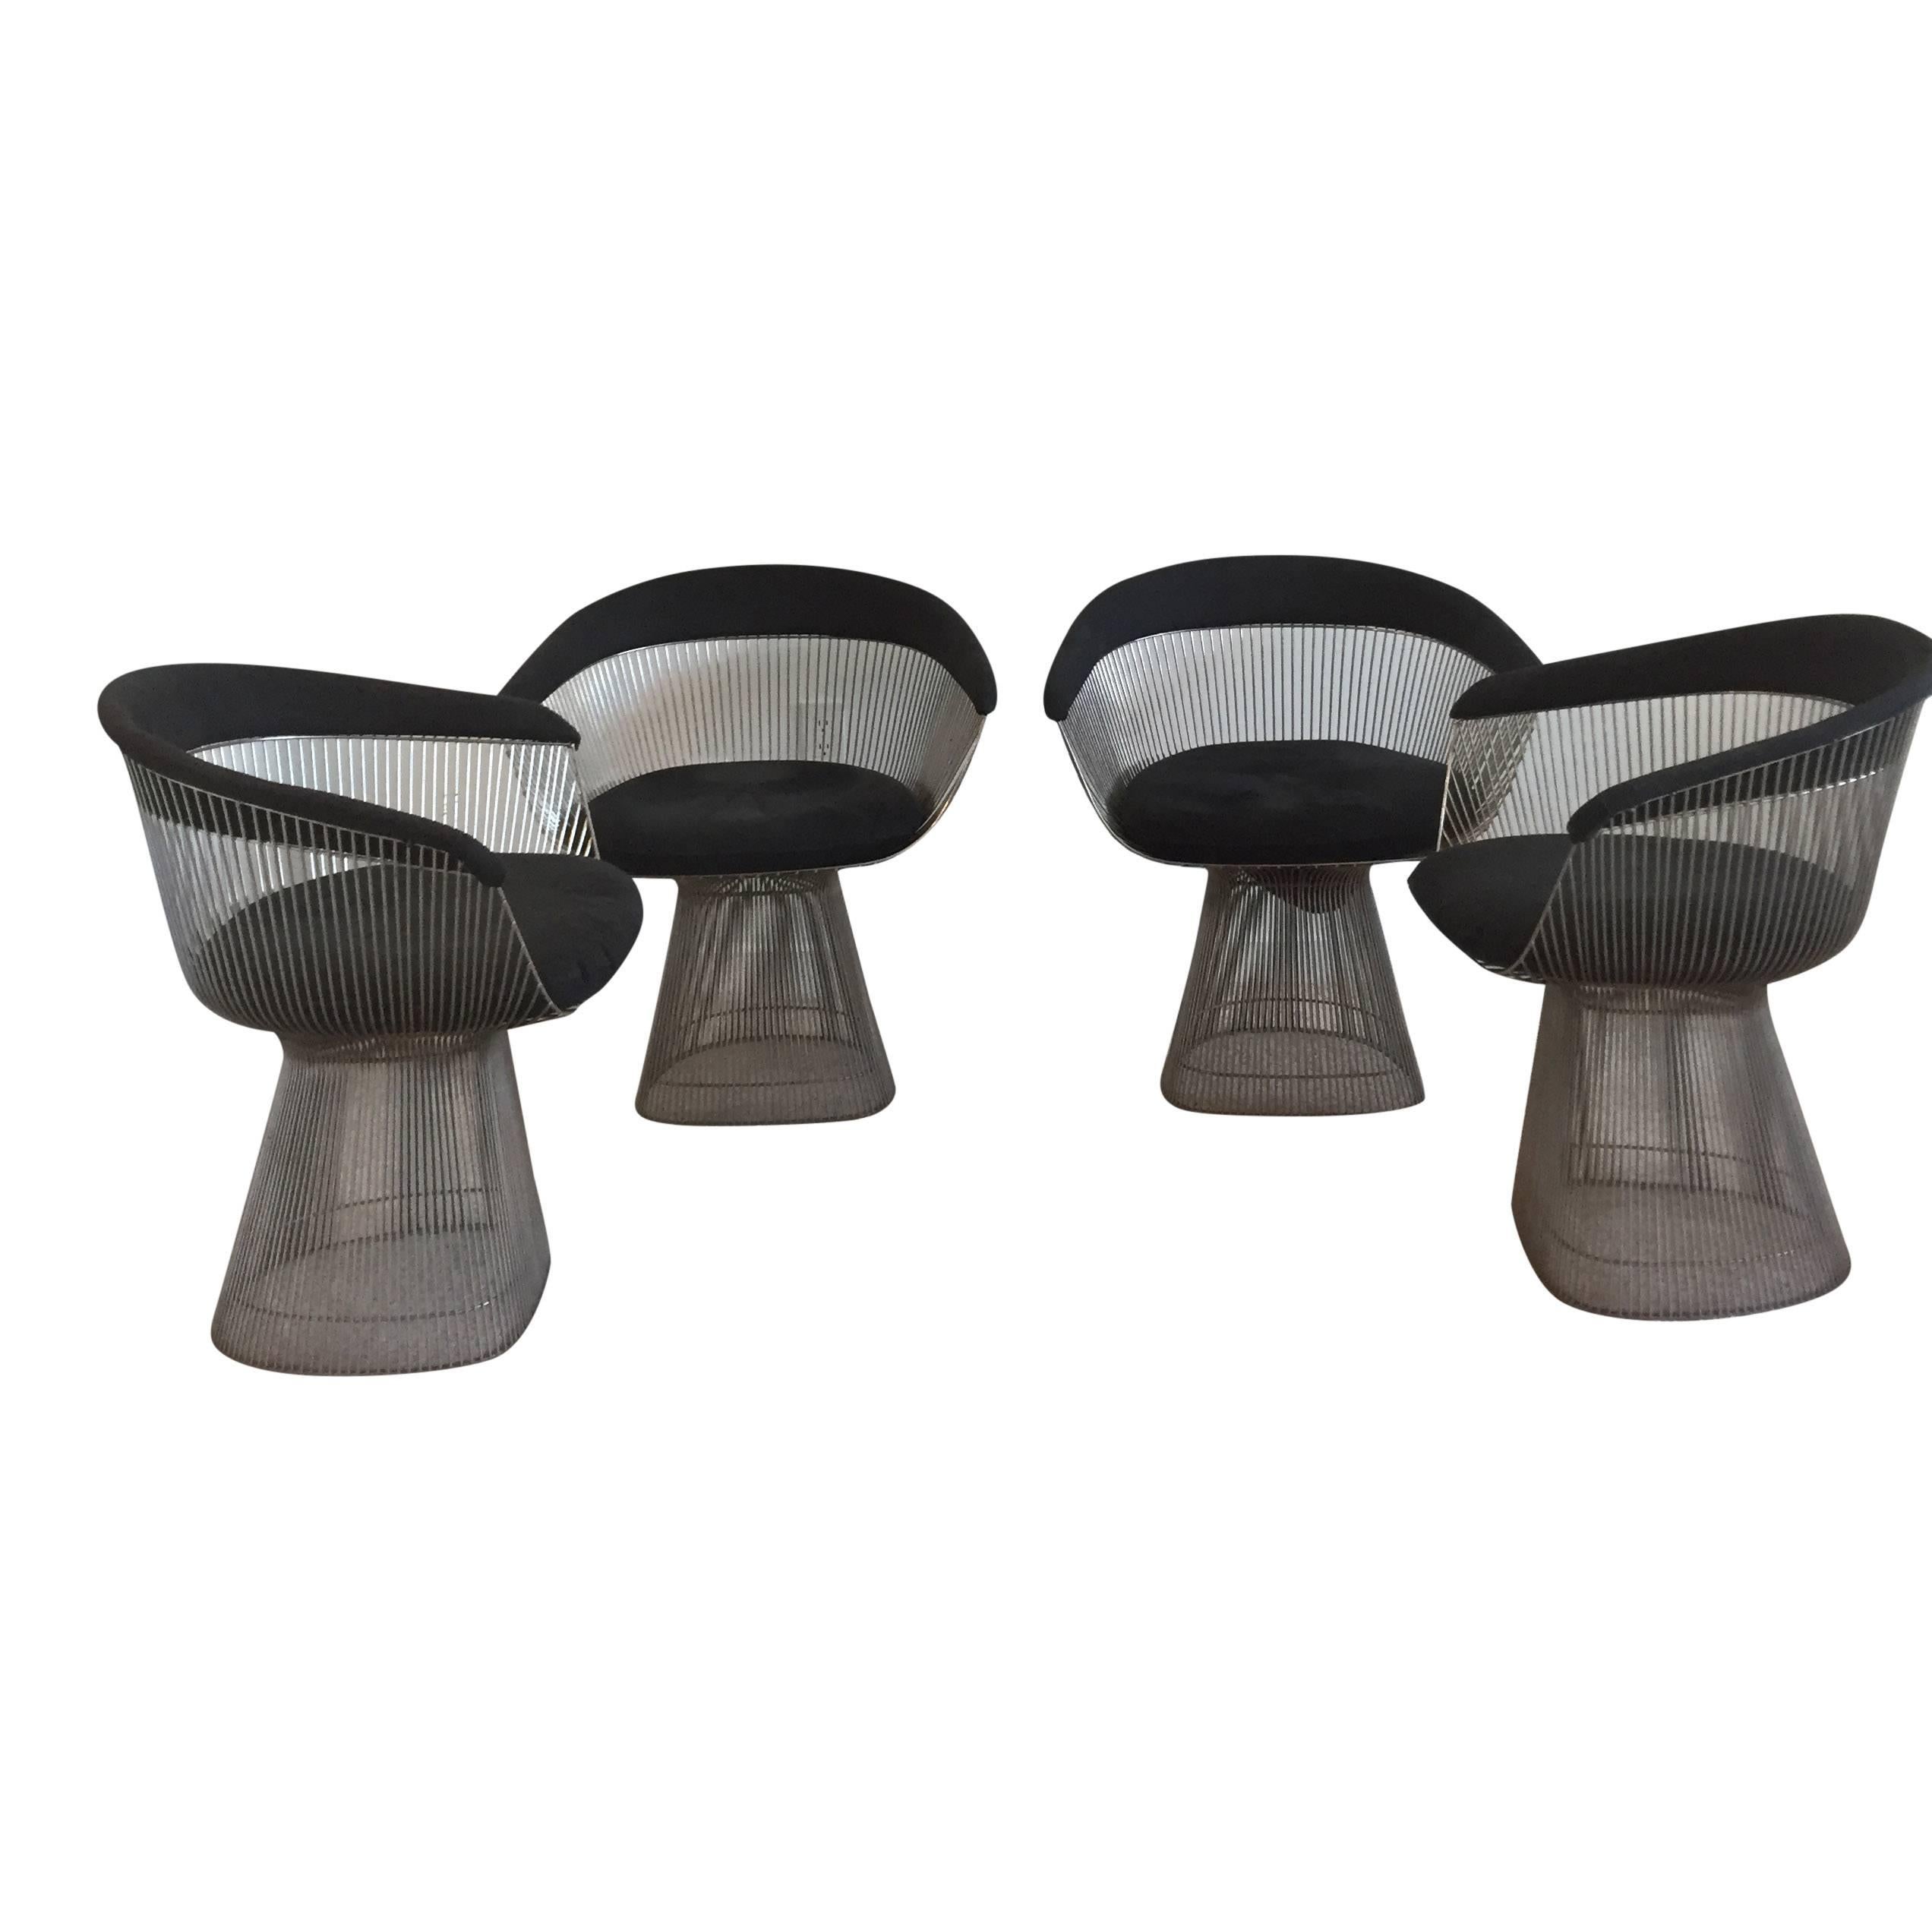 Nickel Warren Platner for Knoll Dining Chairs, Set of Four